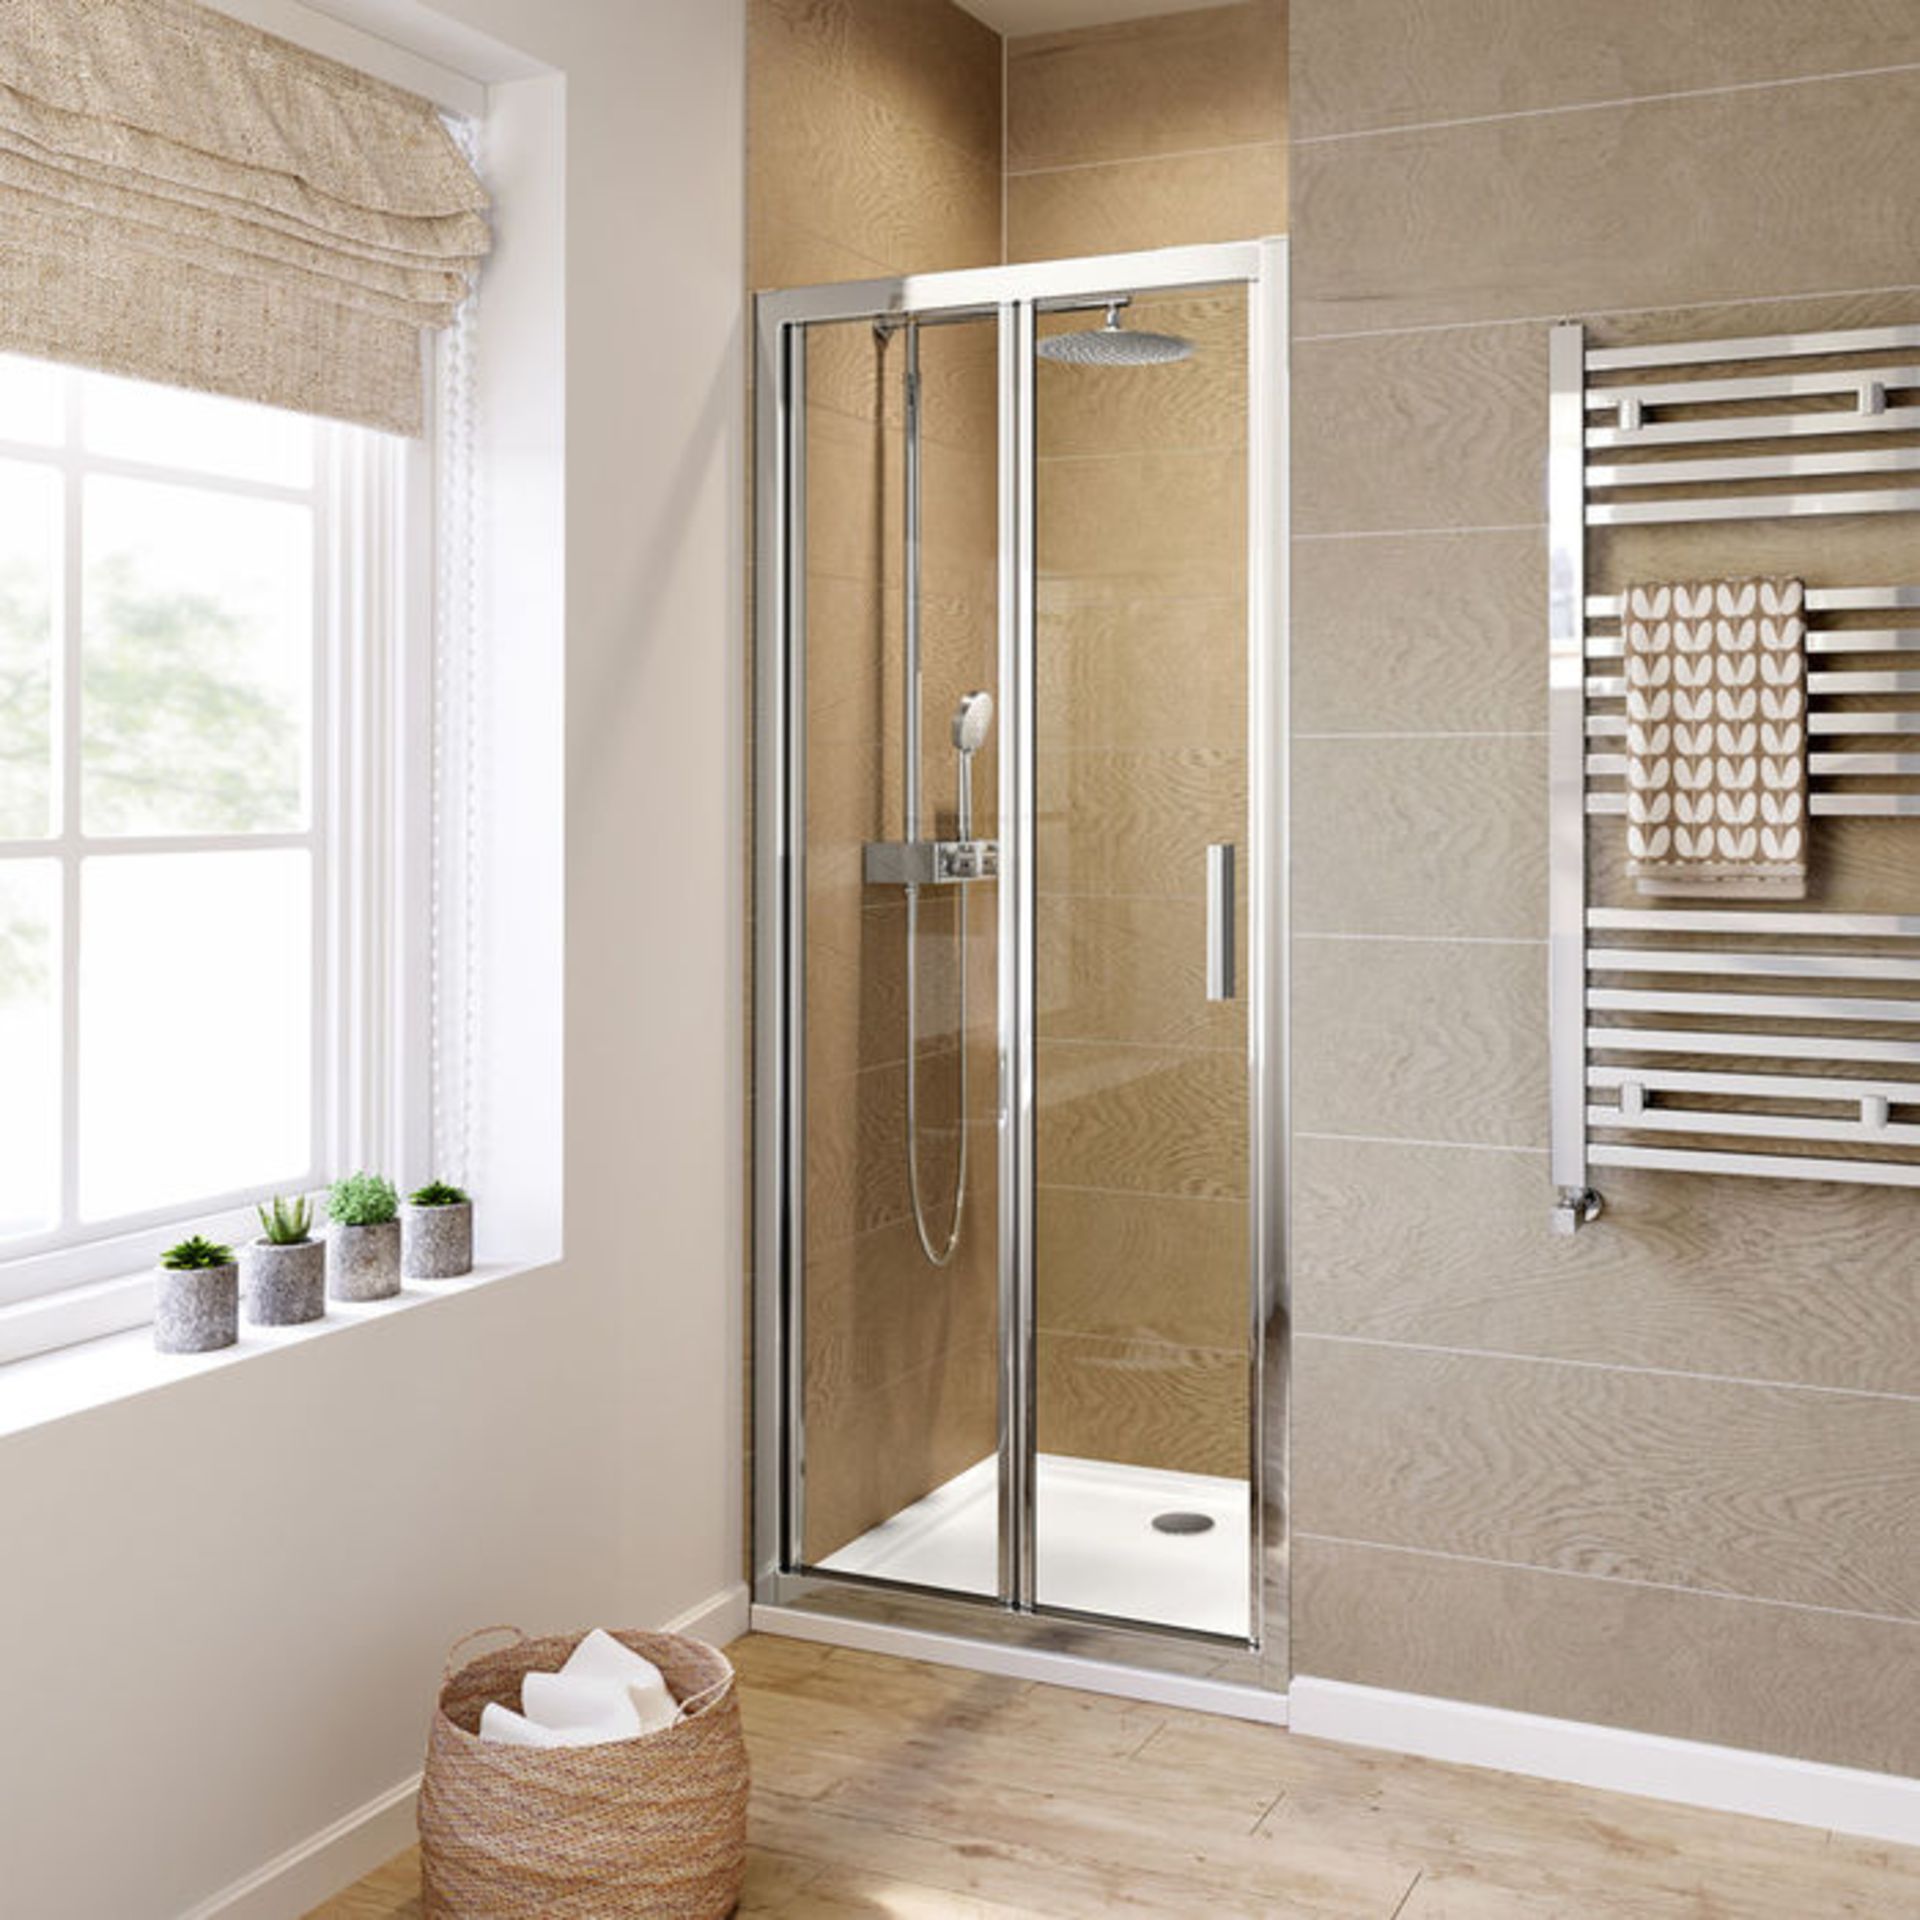 (DW210) 800mm - 6mm - Elements EasyClean Bifold Shower Door. RRP £299.99. 6mm Safety Glass - ... - Image 2 of 3